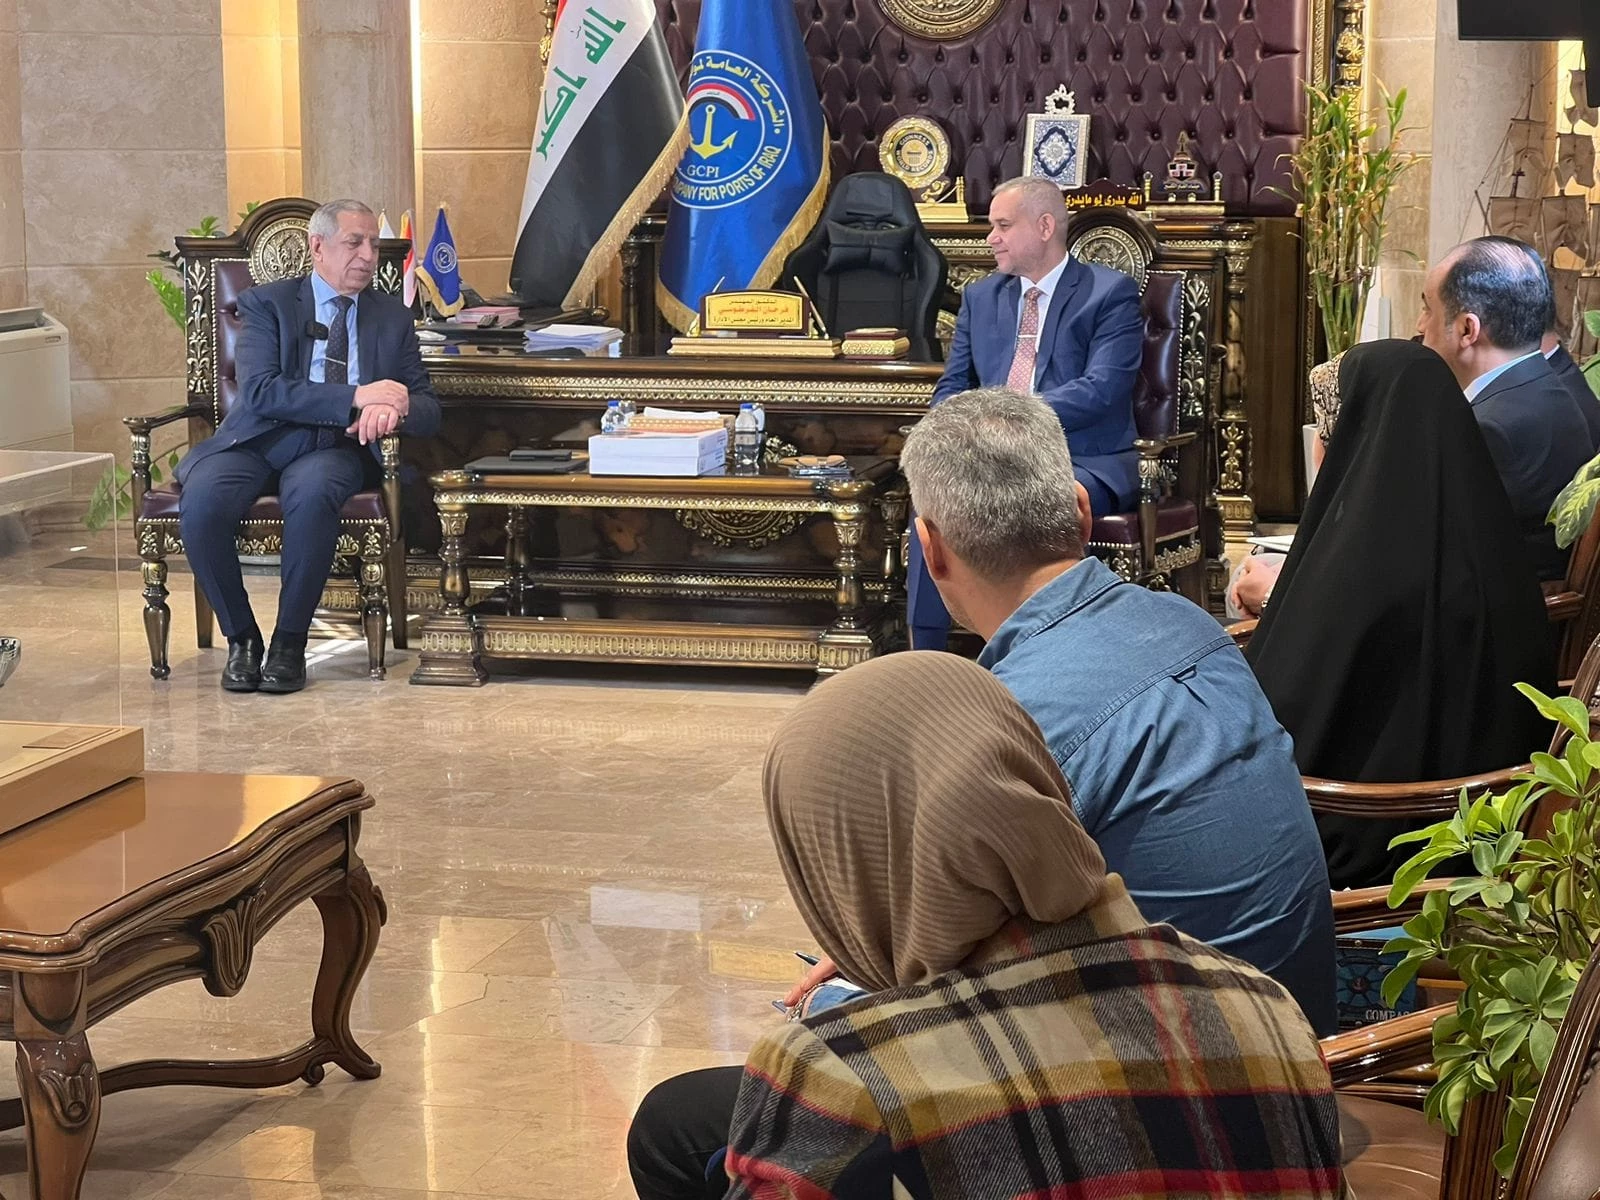 Meeting of the President of Arab Academy for Science, Technology & Maritime Transport  (AASTMT) and a Delegation from Port Training Institute (PTI) with the Iraqi Minister of Transport5